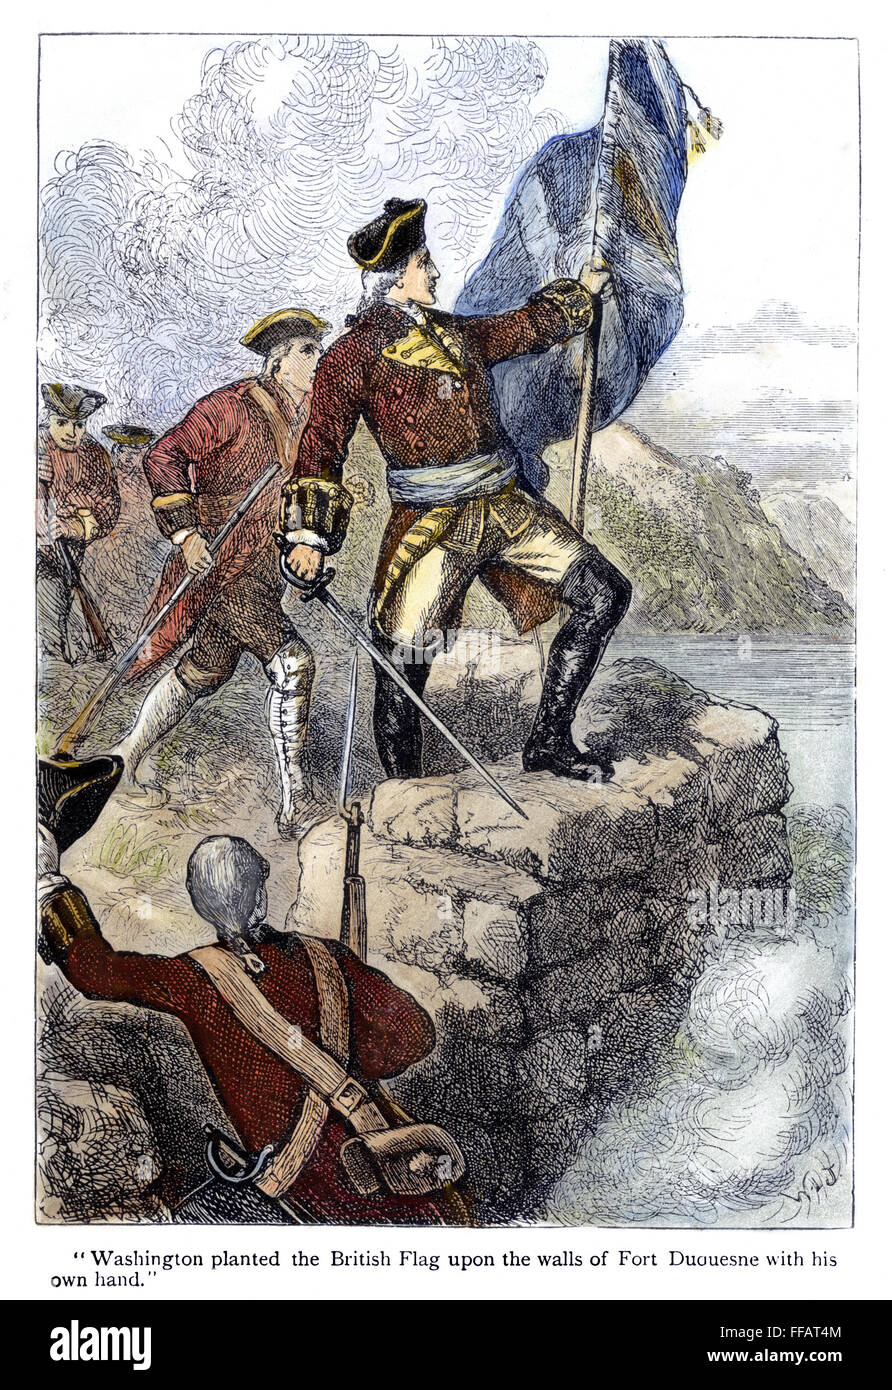 FORT DUQUESNE, 1758. /nColonel George Washington of the Virginia militia planting the British flag at Fort Duquesne (rebuilt as Fort Pitt), November 1758: wood engraving, late 19th century. Stock Photo